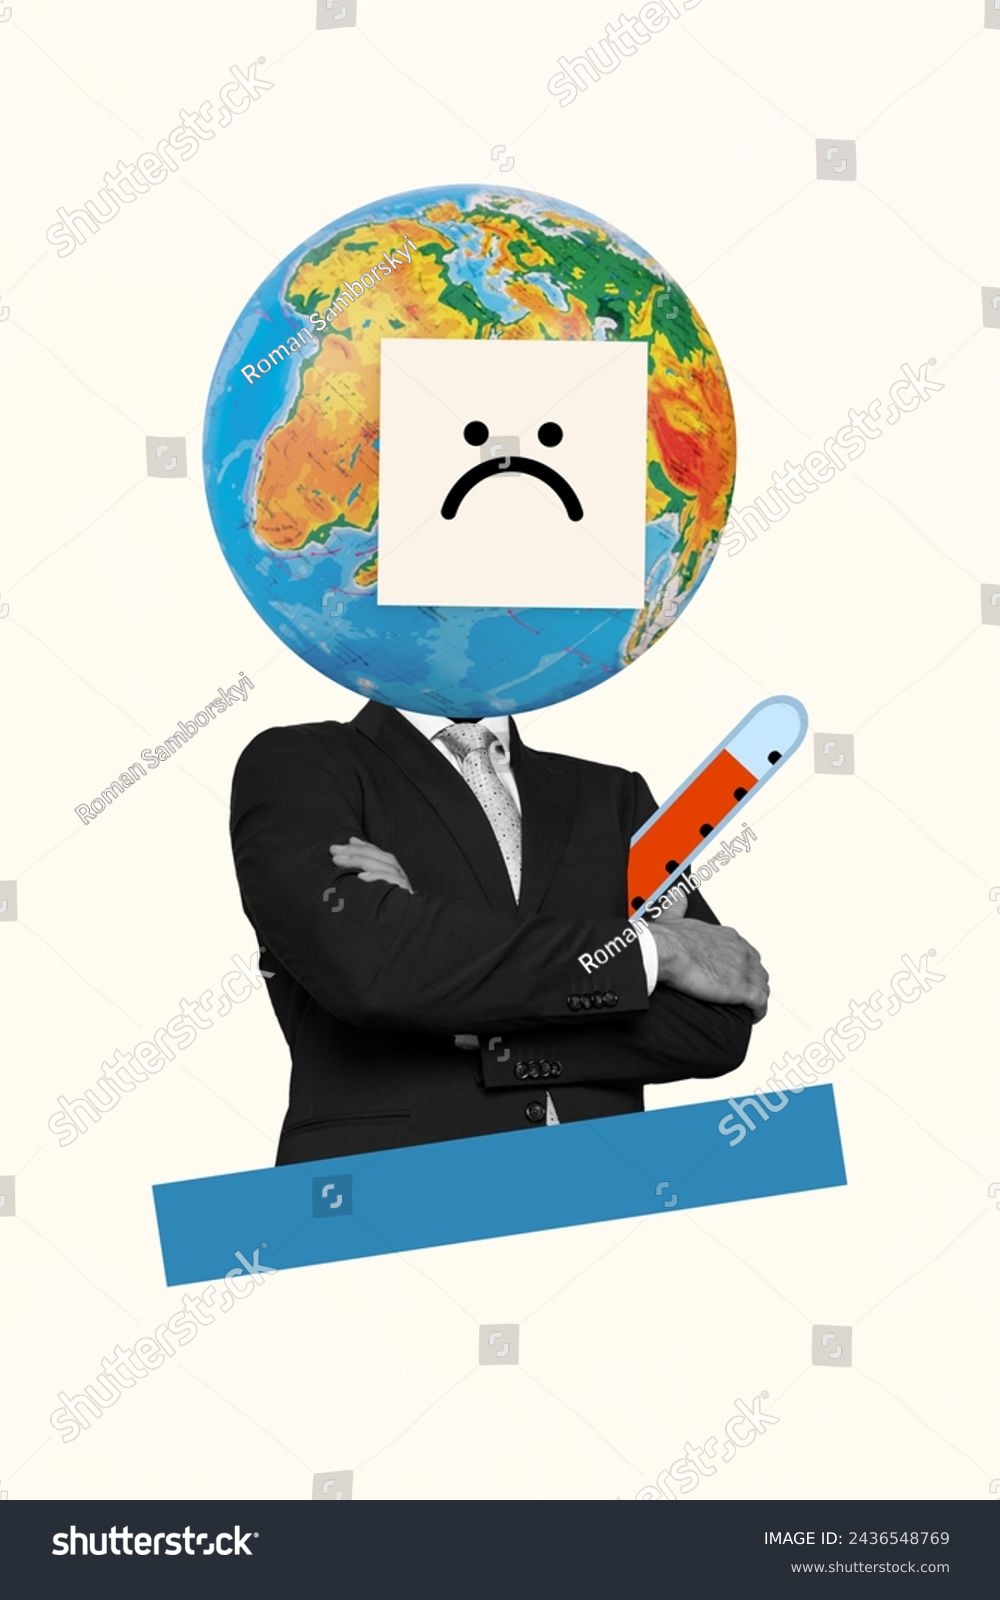 Cartoon collage illustration thermometer sick planet earth ecology issue climate change heating global warming isolated on beige background #2436548769